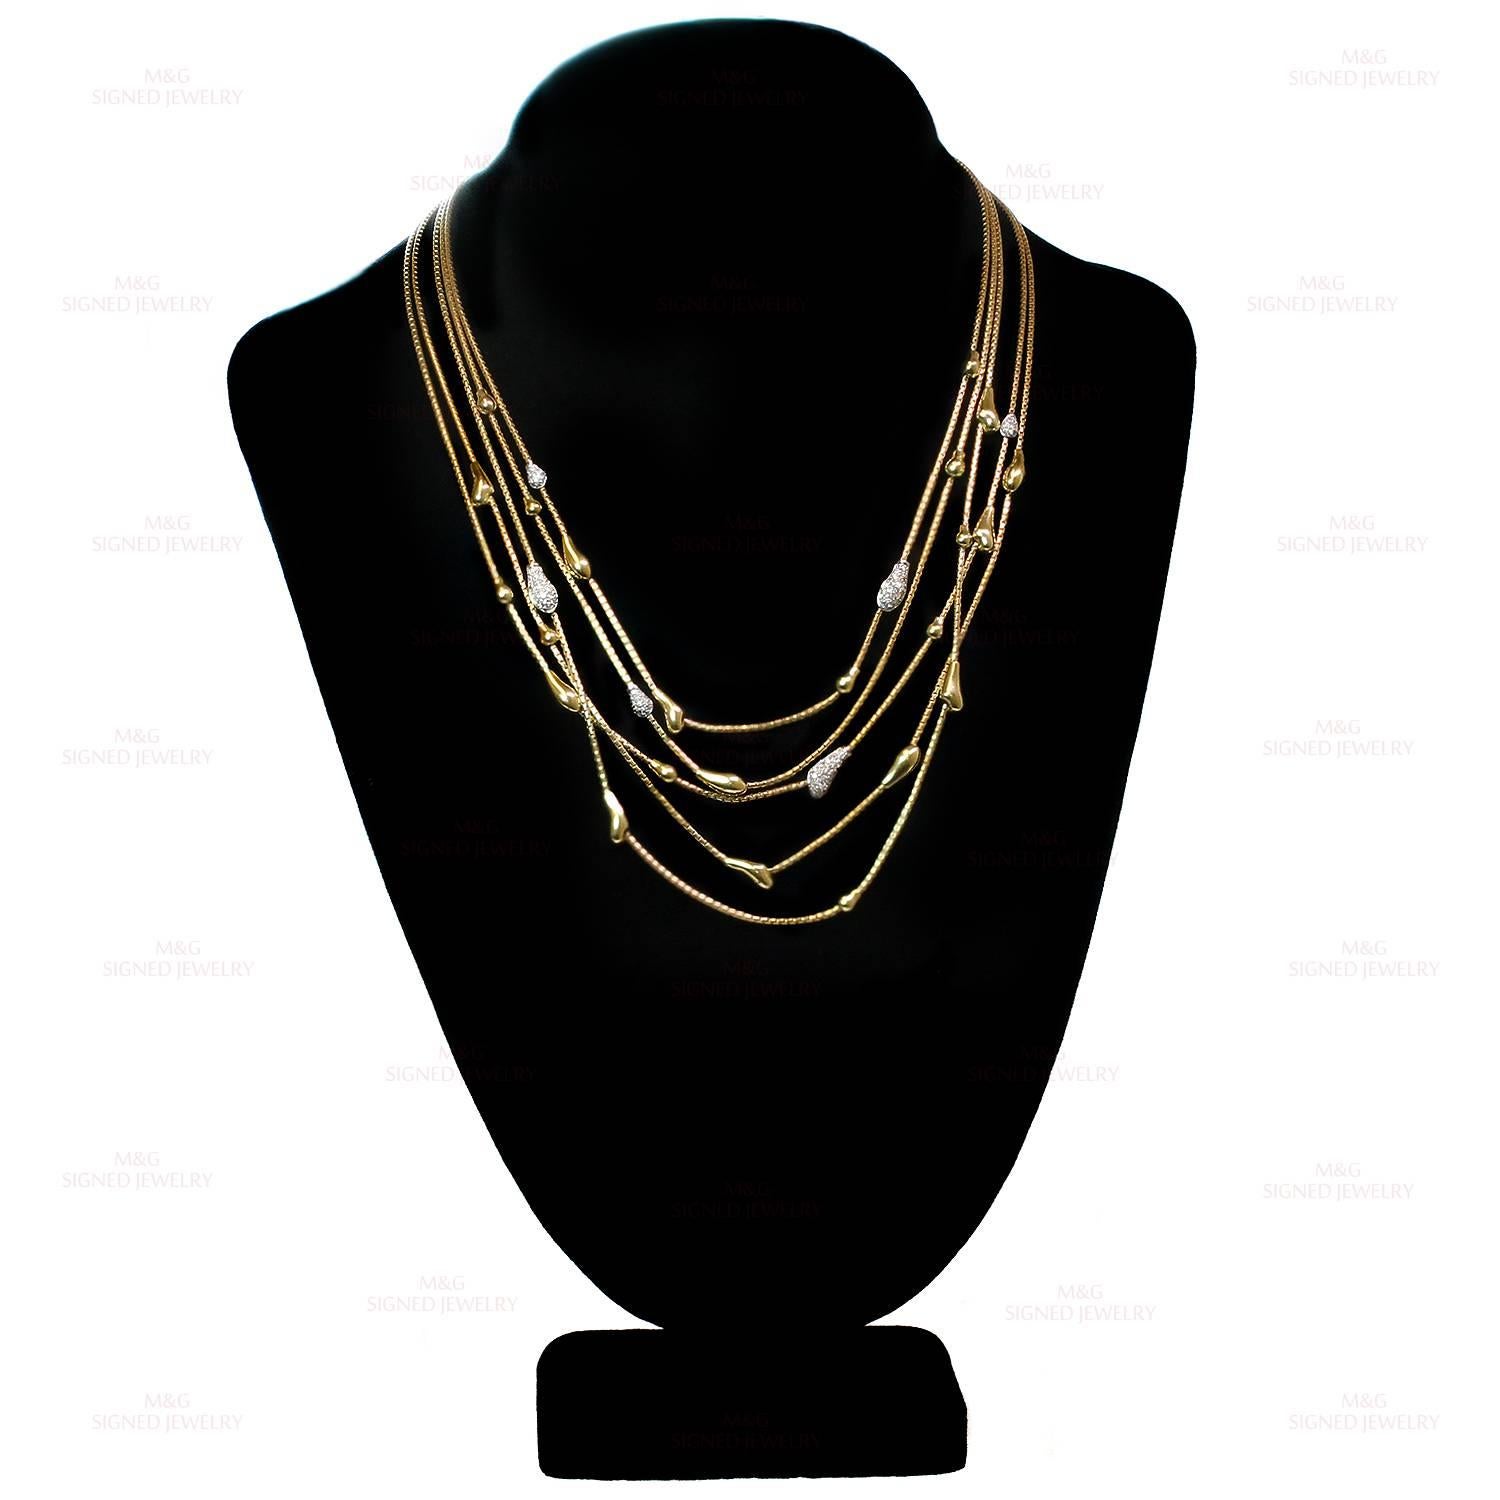 H.Stern Drops Diamond Gold Necklace and Earrings Set 1